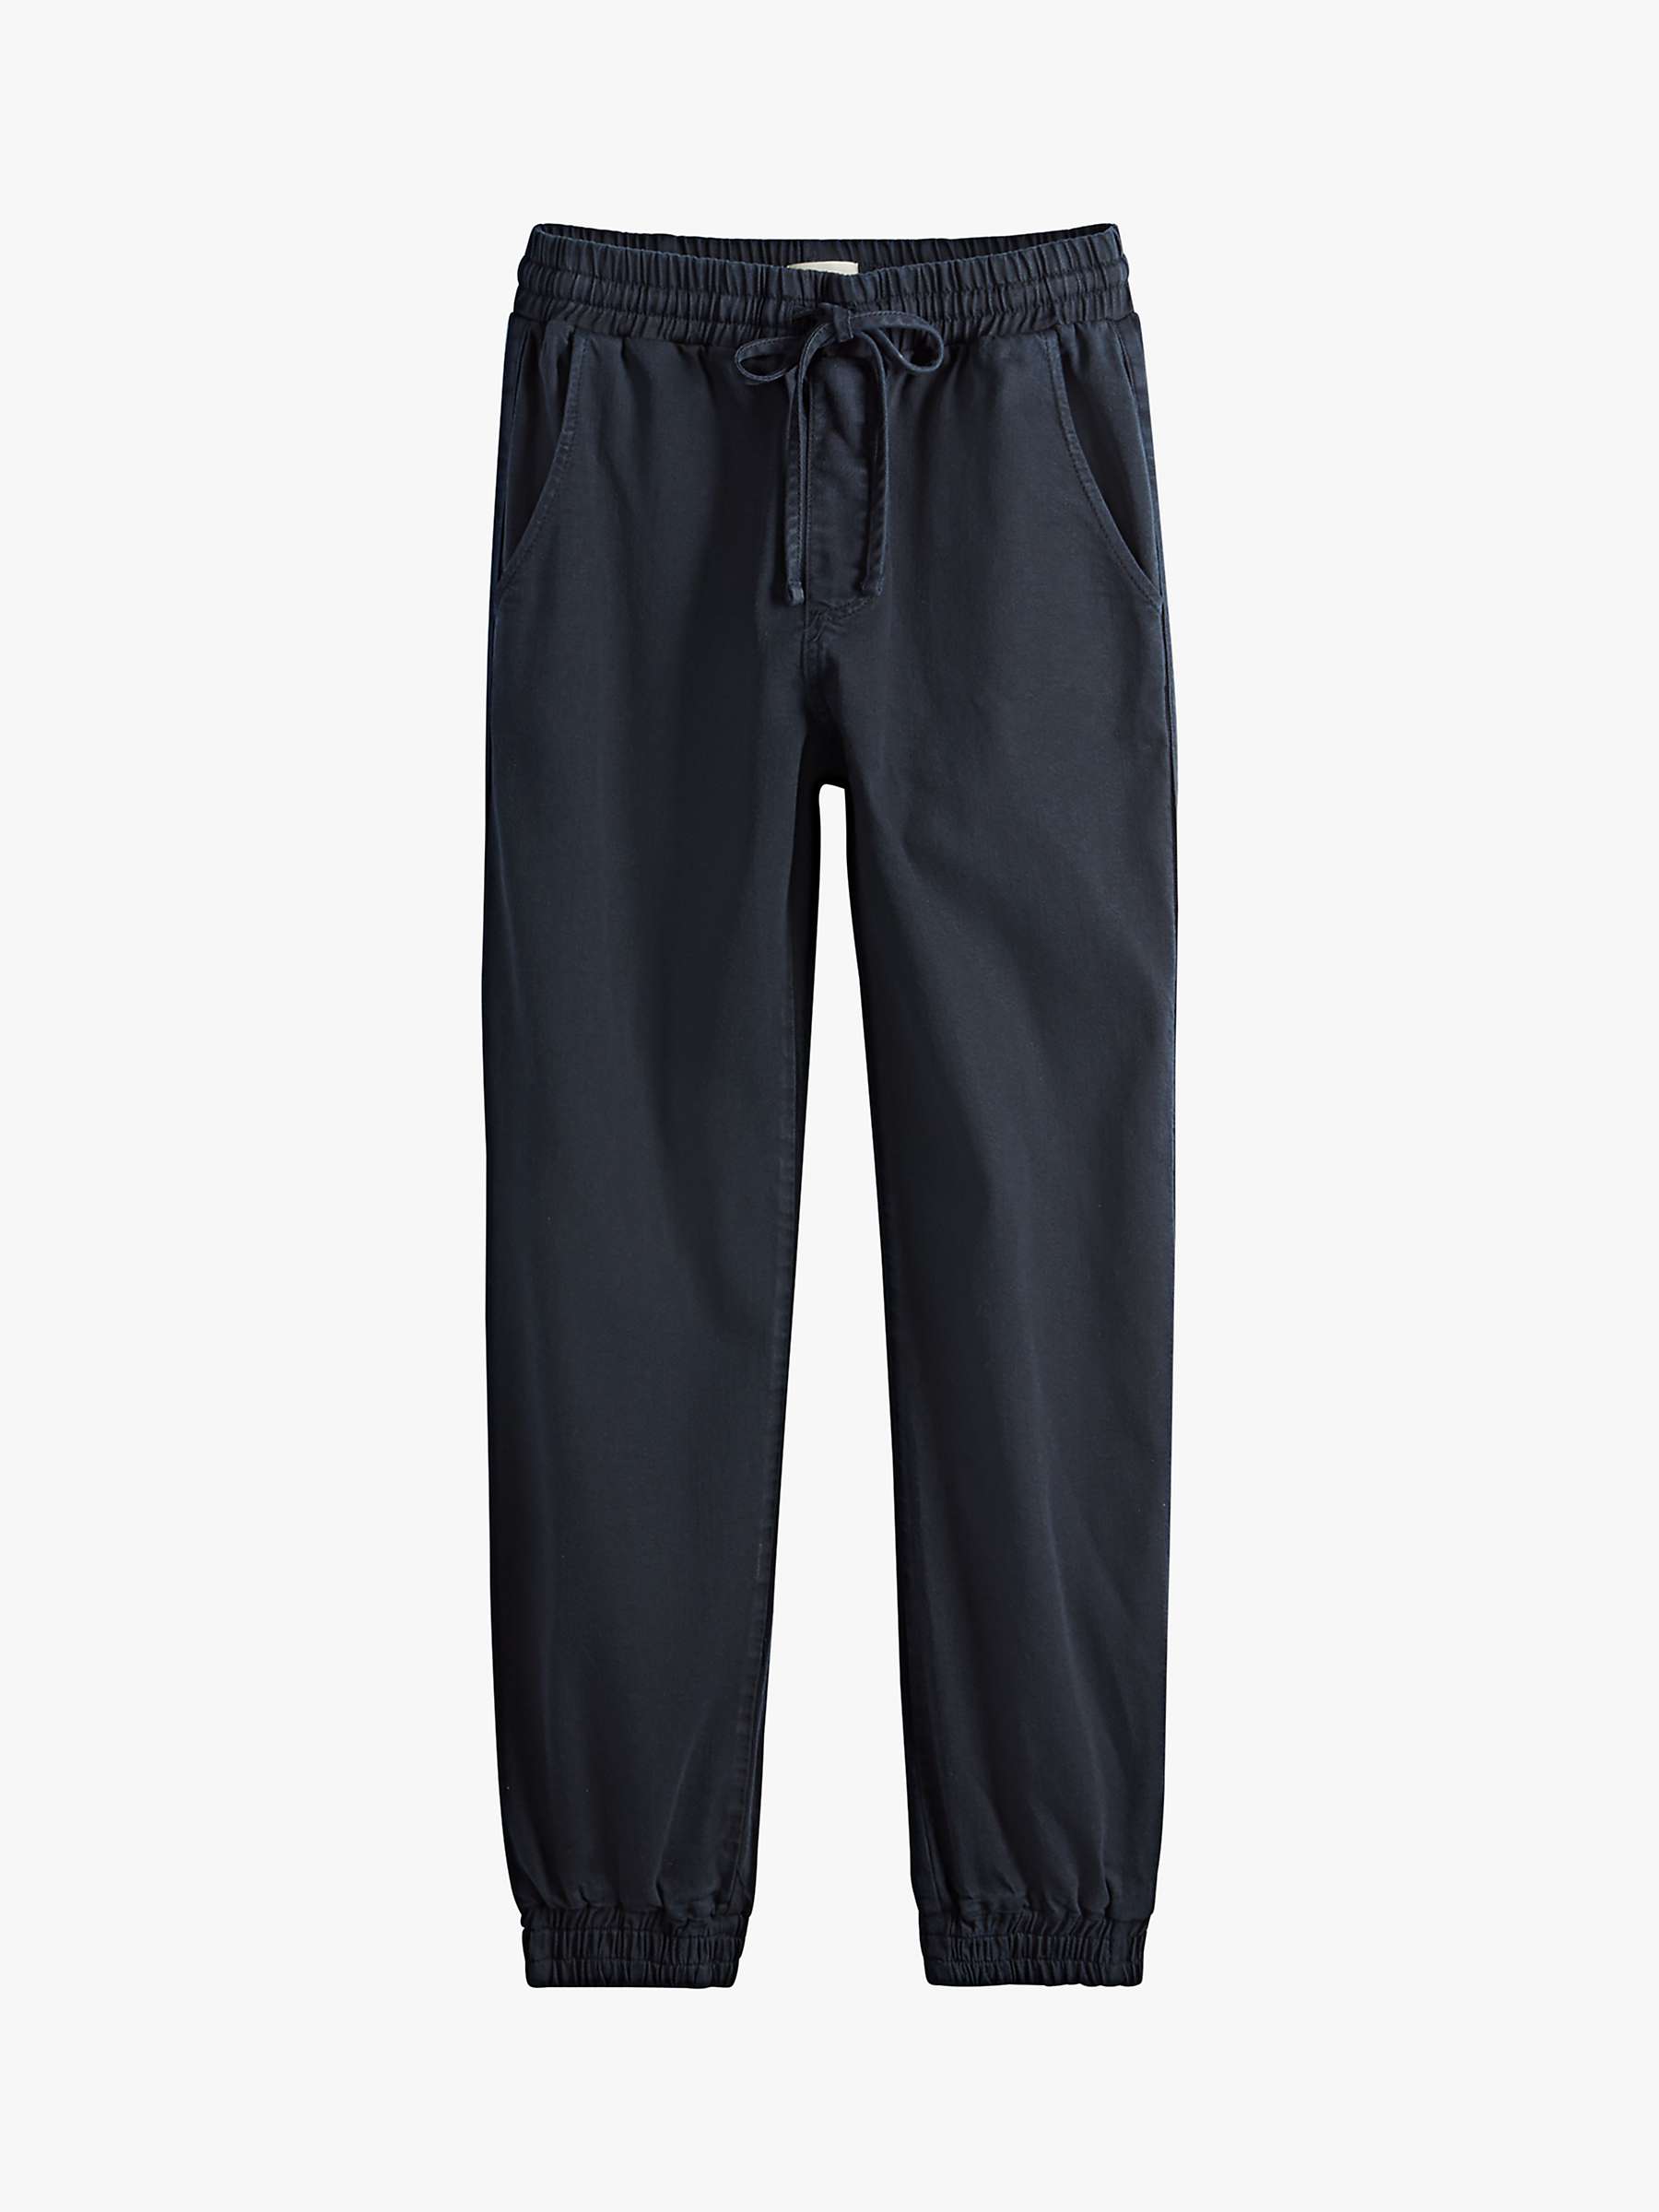 Buy hush Maia Slim Trousers, Midnight Online at johnlewis.com